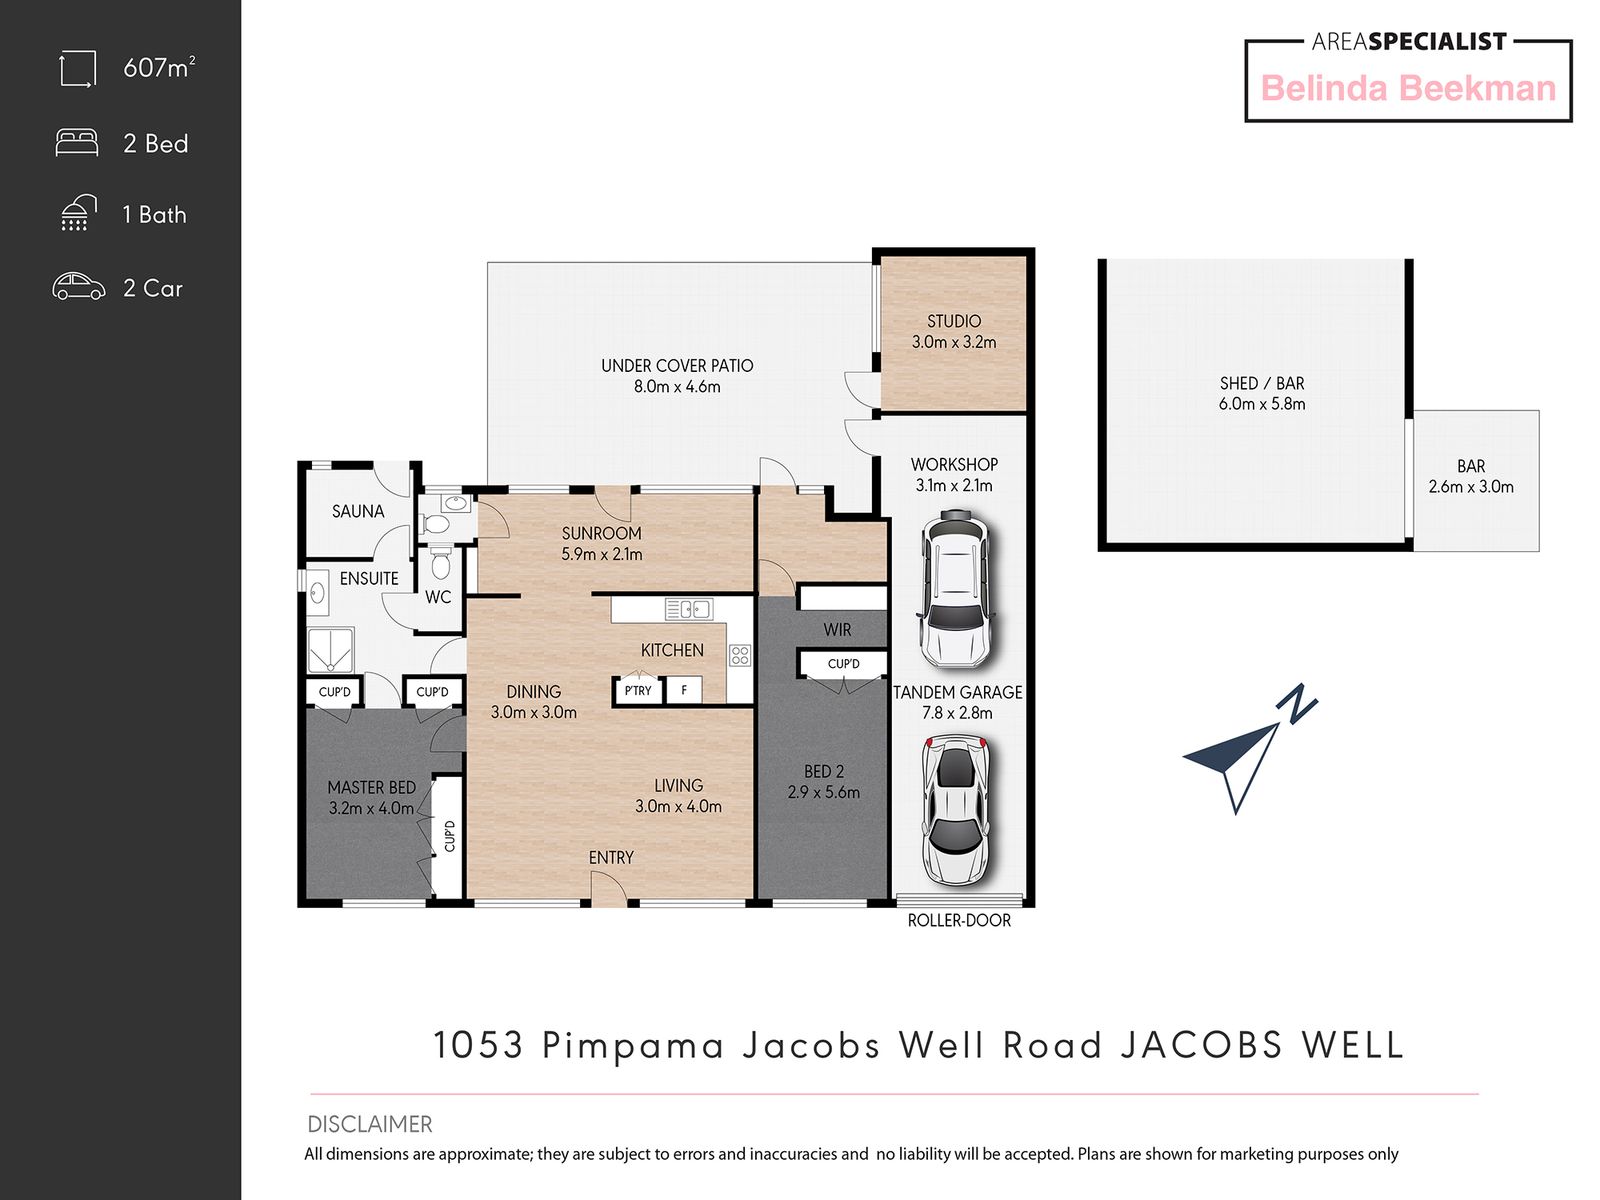 1053 Pimpama Jacobs Well Road, Jacobs Well